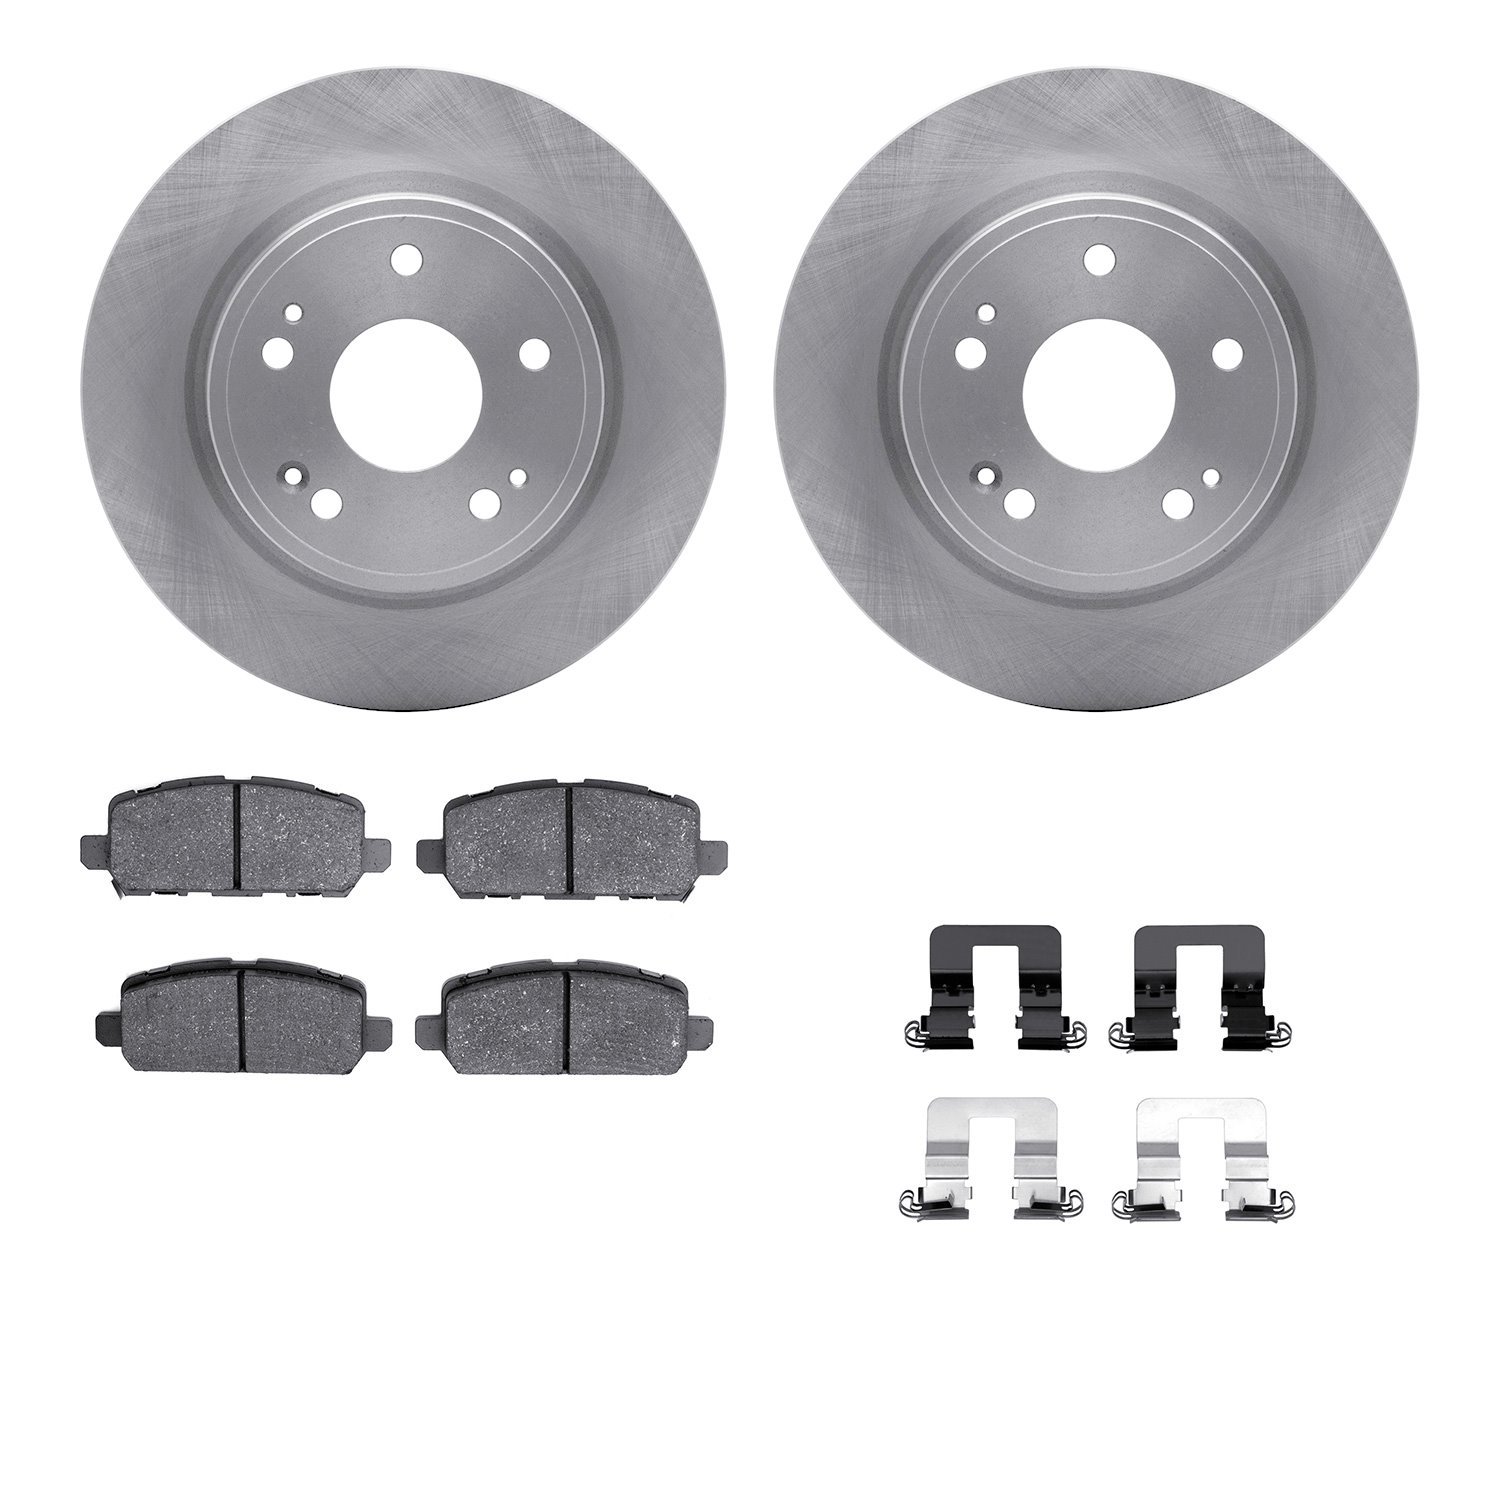 6312-59105 Brake Rotors with 3000-Series Ceramic Brake Pads Kit with Hardware, Fits Select Acura/Honda, Position: Rear